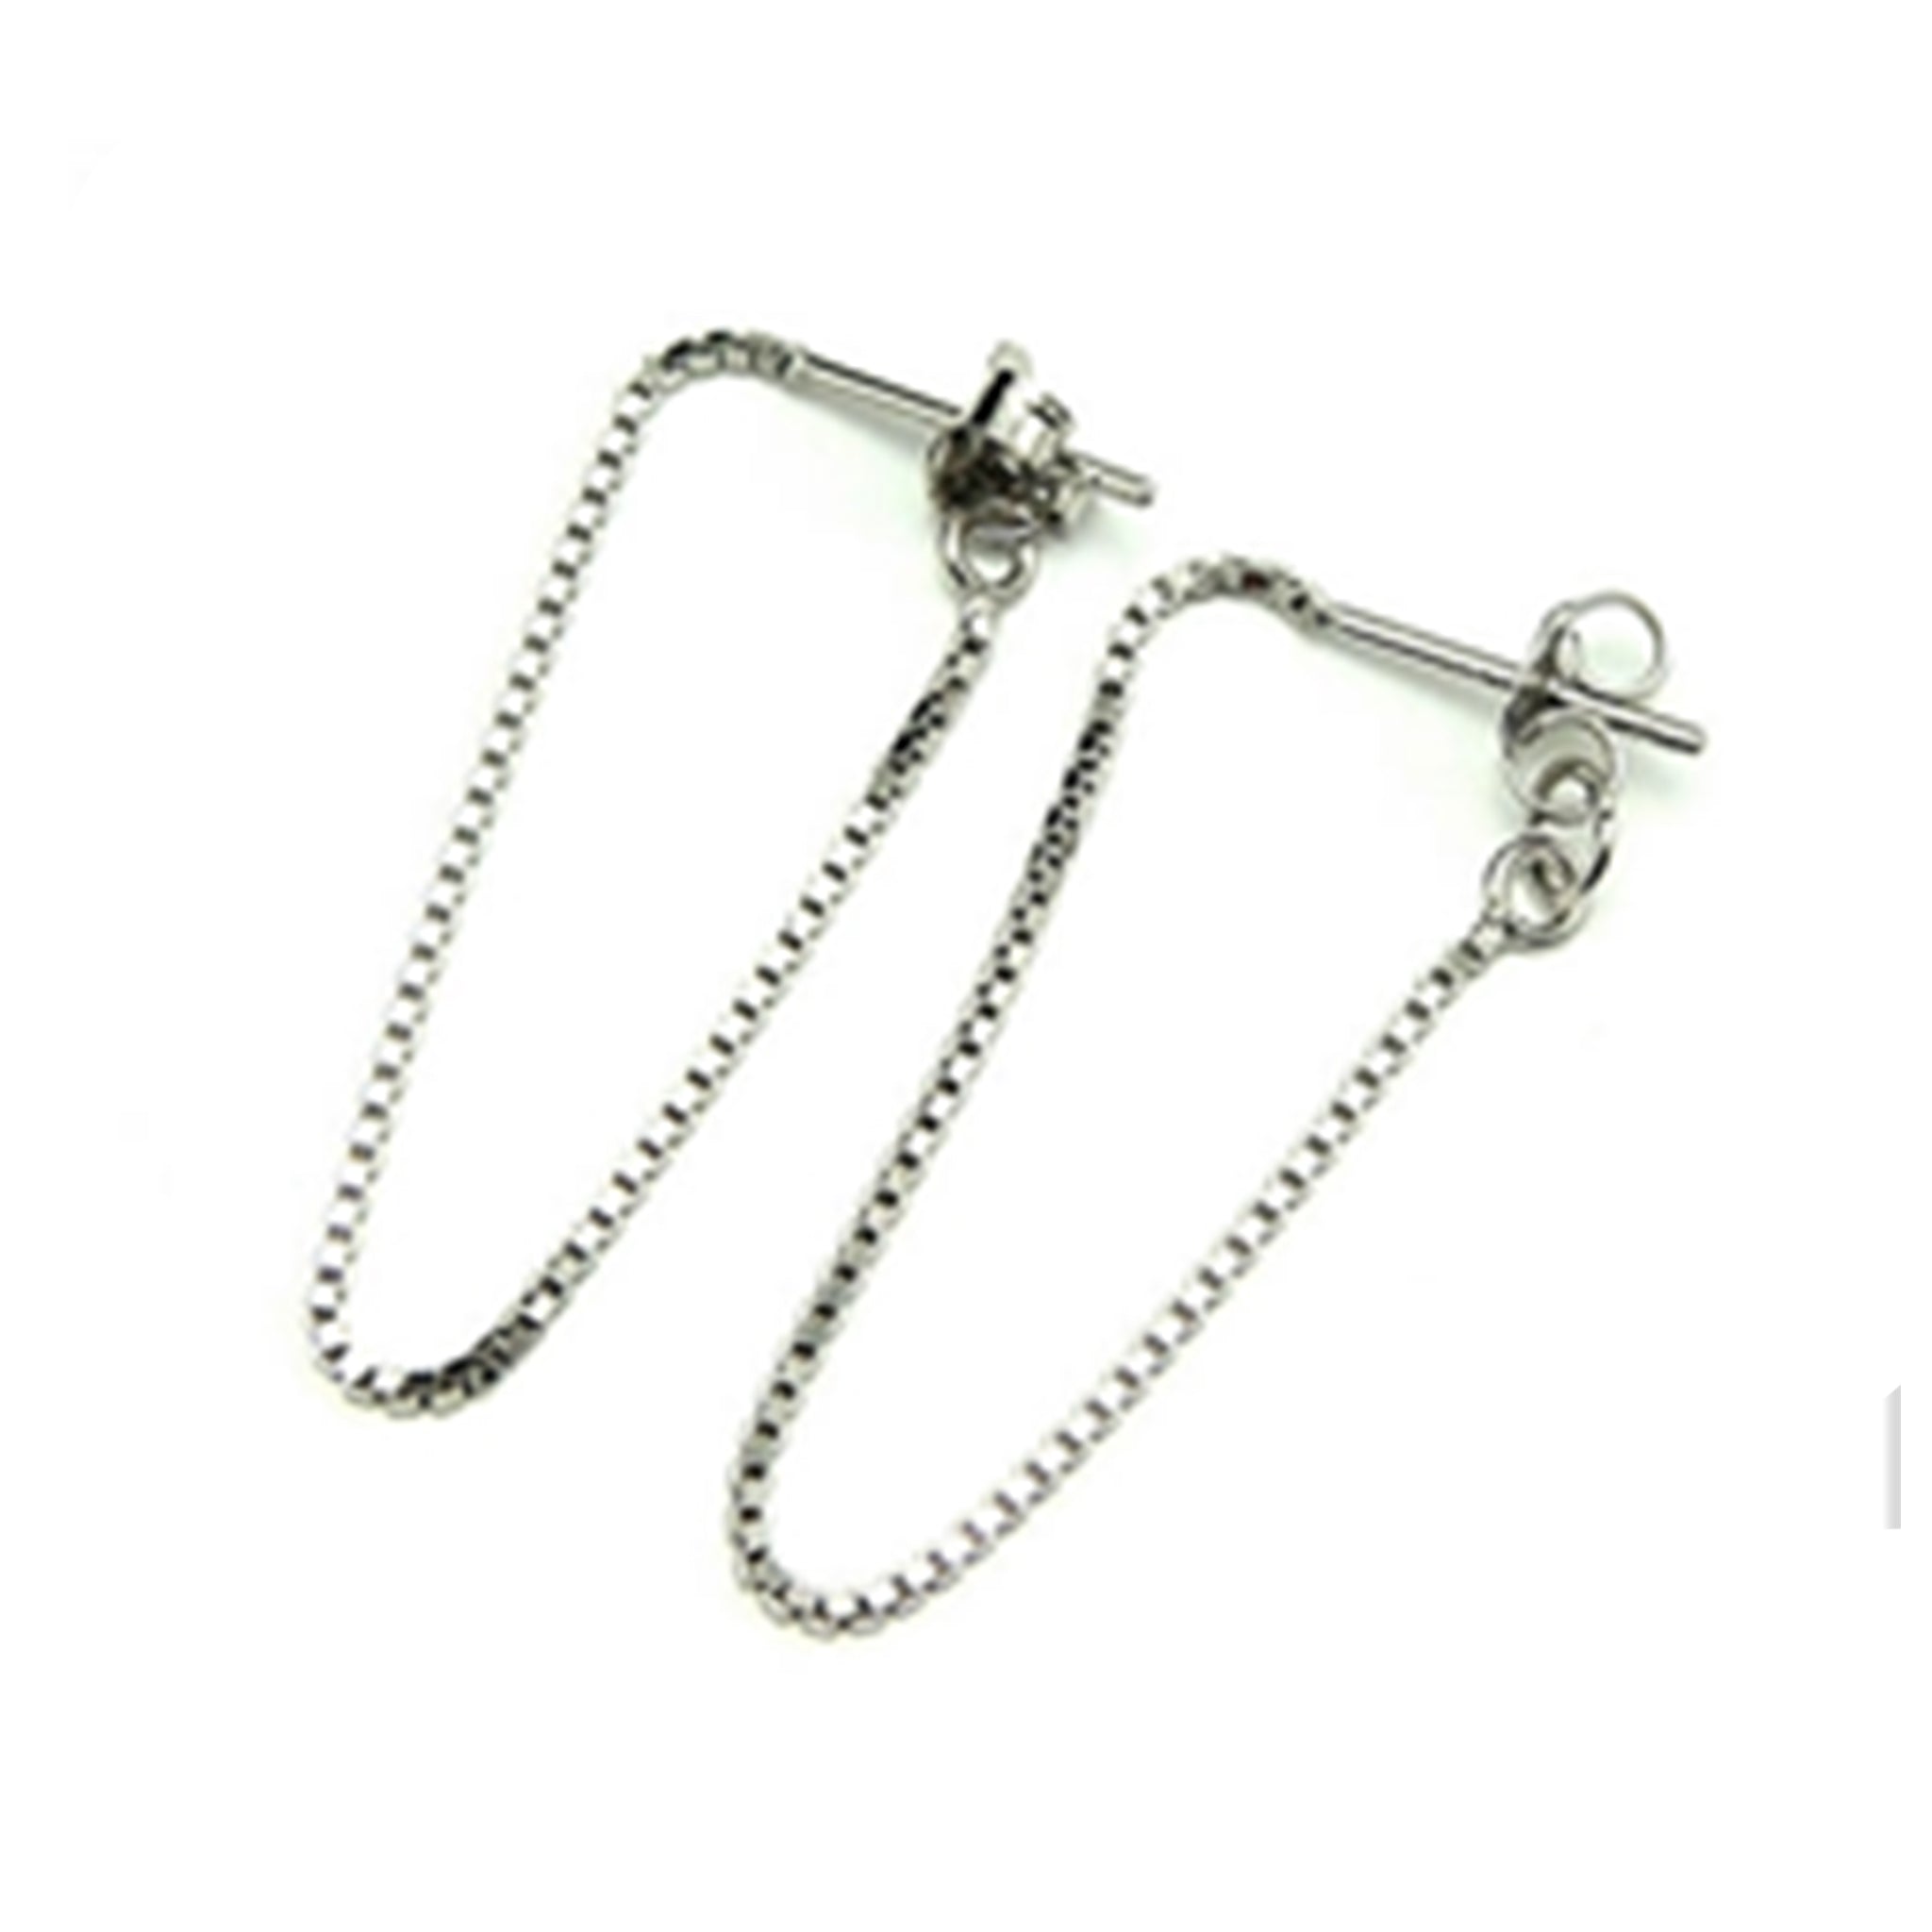 Ear Posts with Chain in Sterling Silver 10.7x69.2mm 21 Gauge